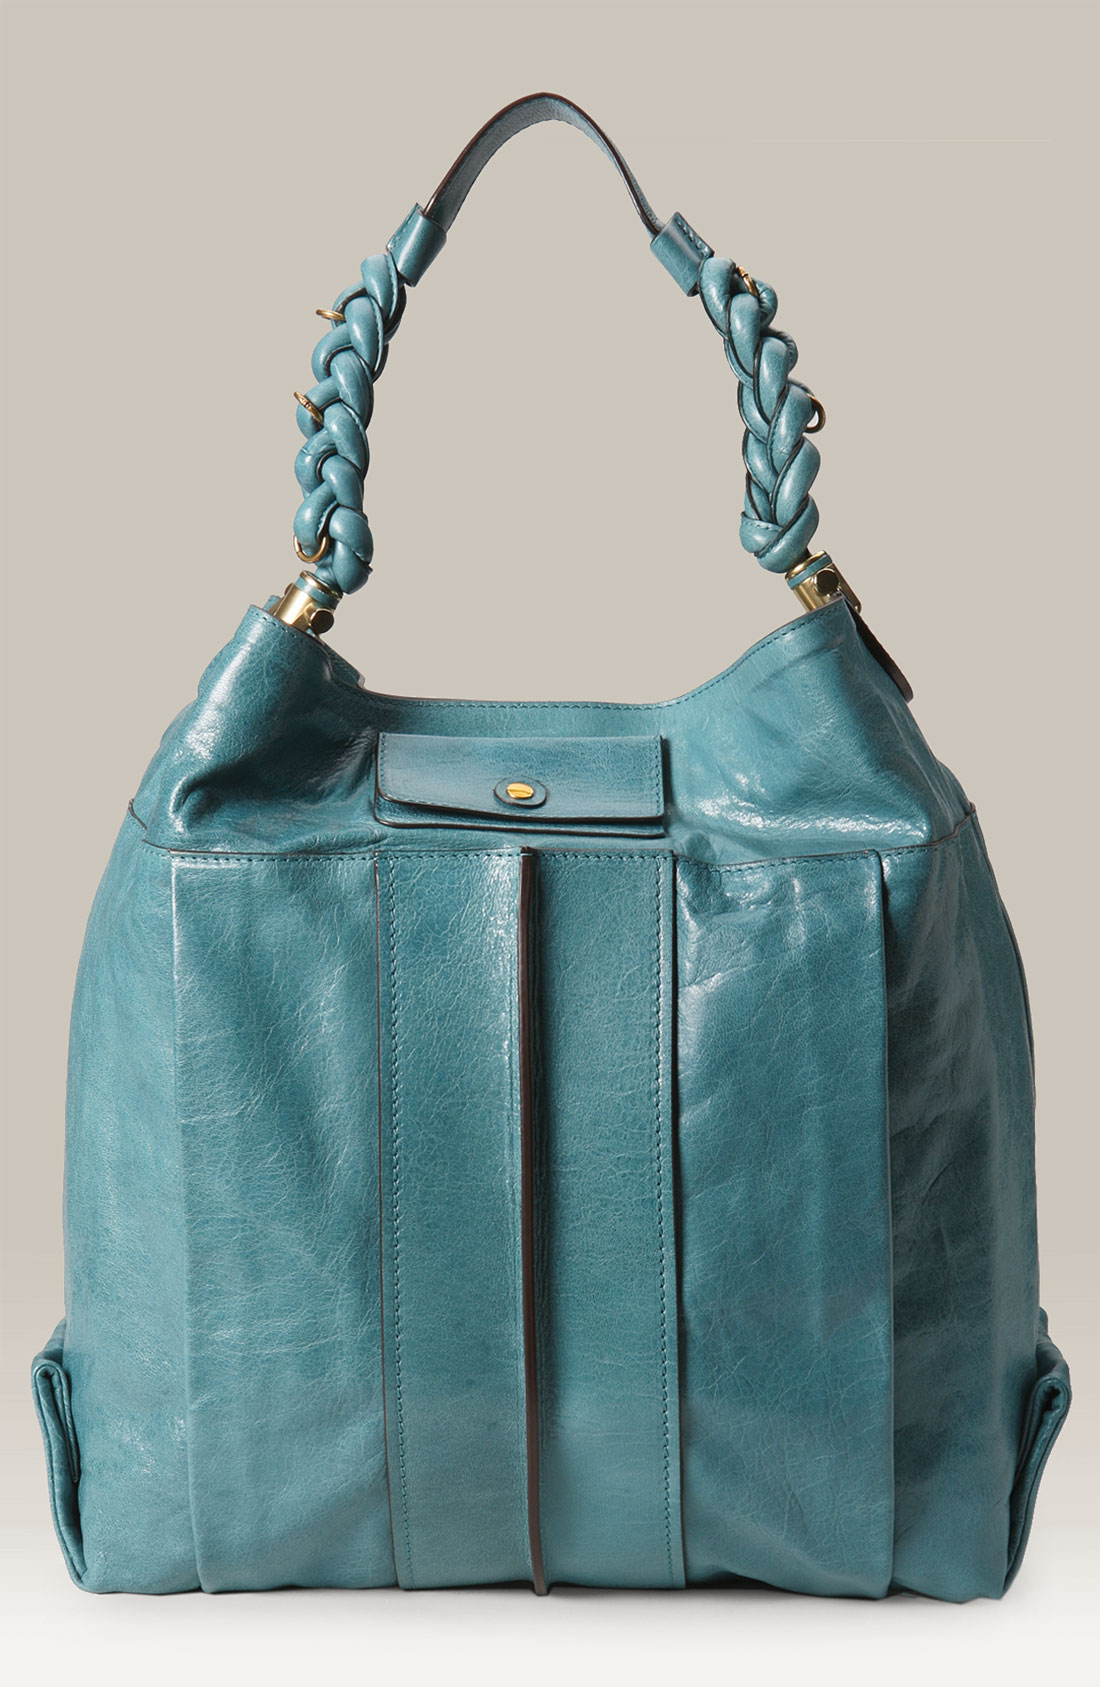 chloe purse replica - Chlo Heloise Leather Hobo in Blue (turquoise) | Lyst